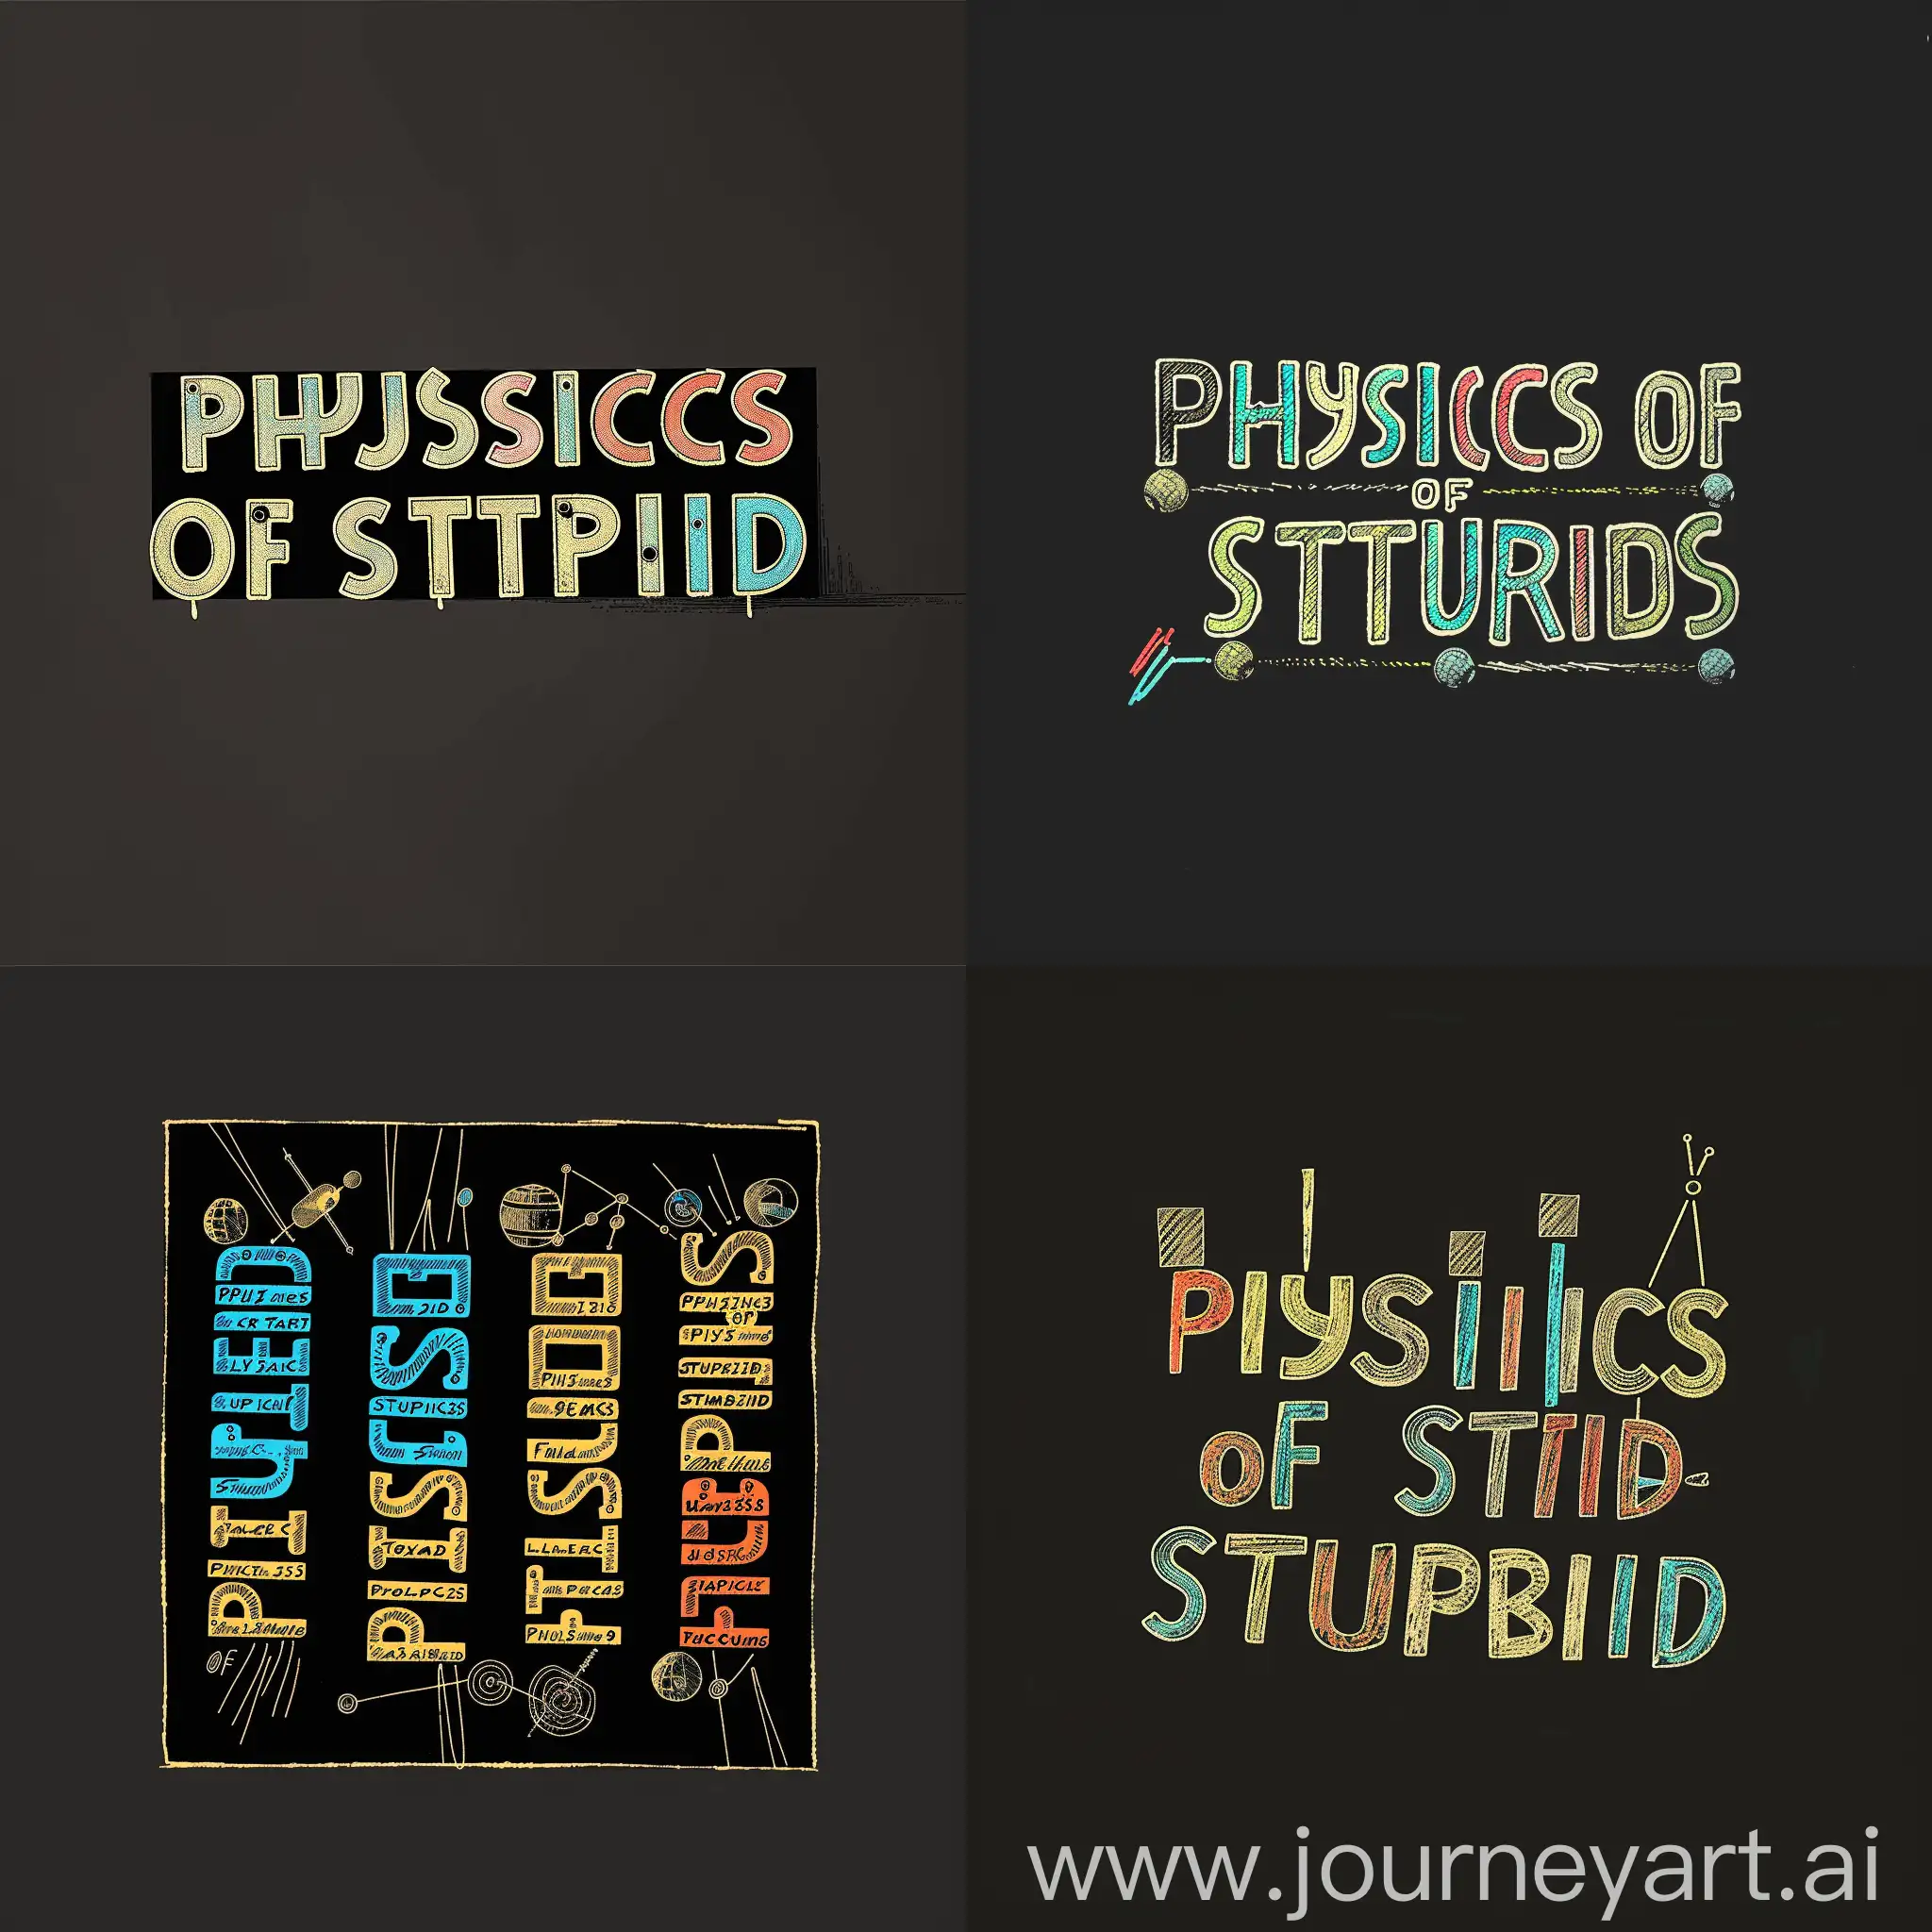 text "PHYSICS of STUPID" in 3 different lines, black background, highlight the text best, use physics theme, keep simple, A3 Size, 3 color
